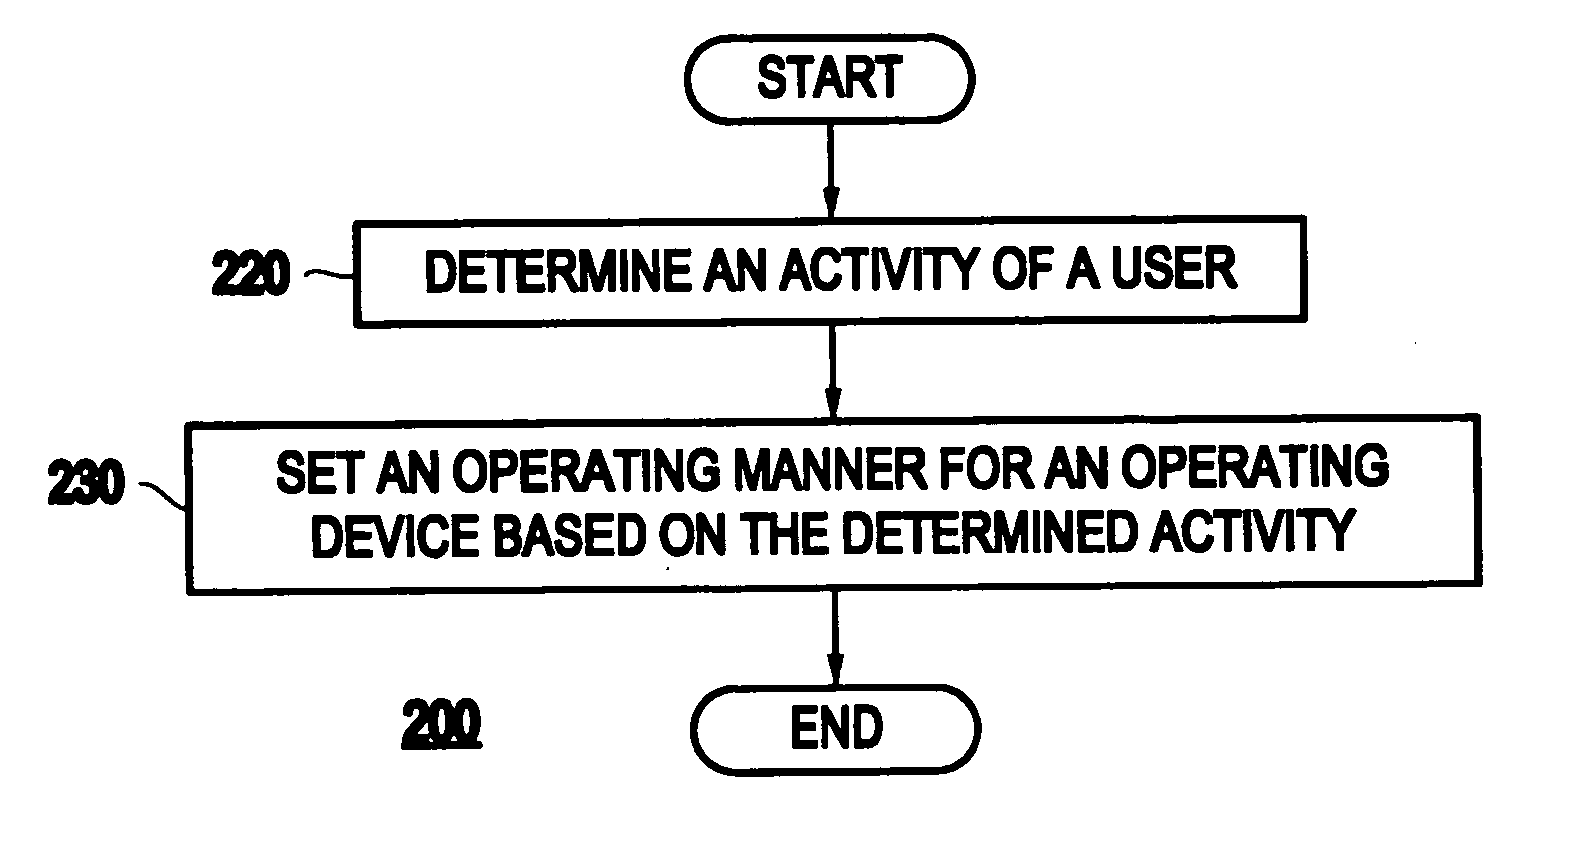 Computer system and method including an operation performed in a manner based on a determined activity